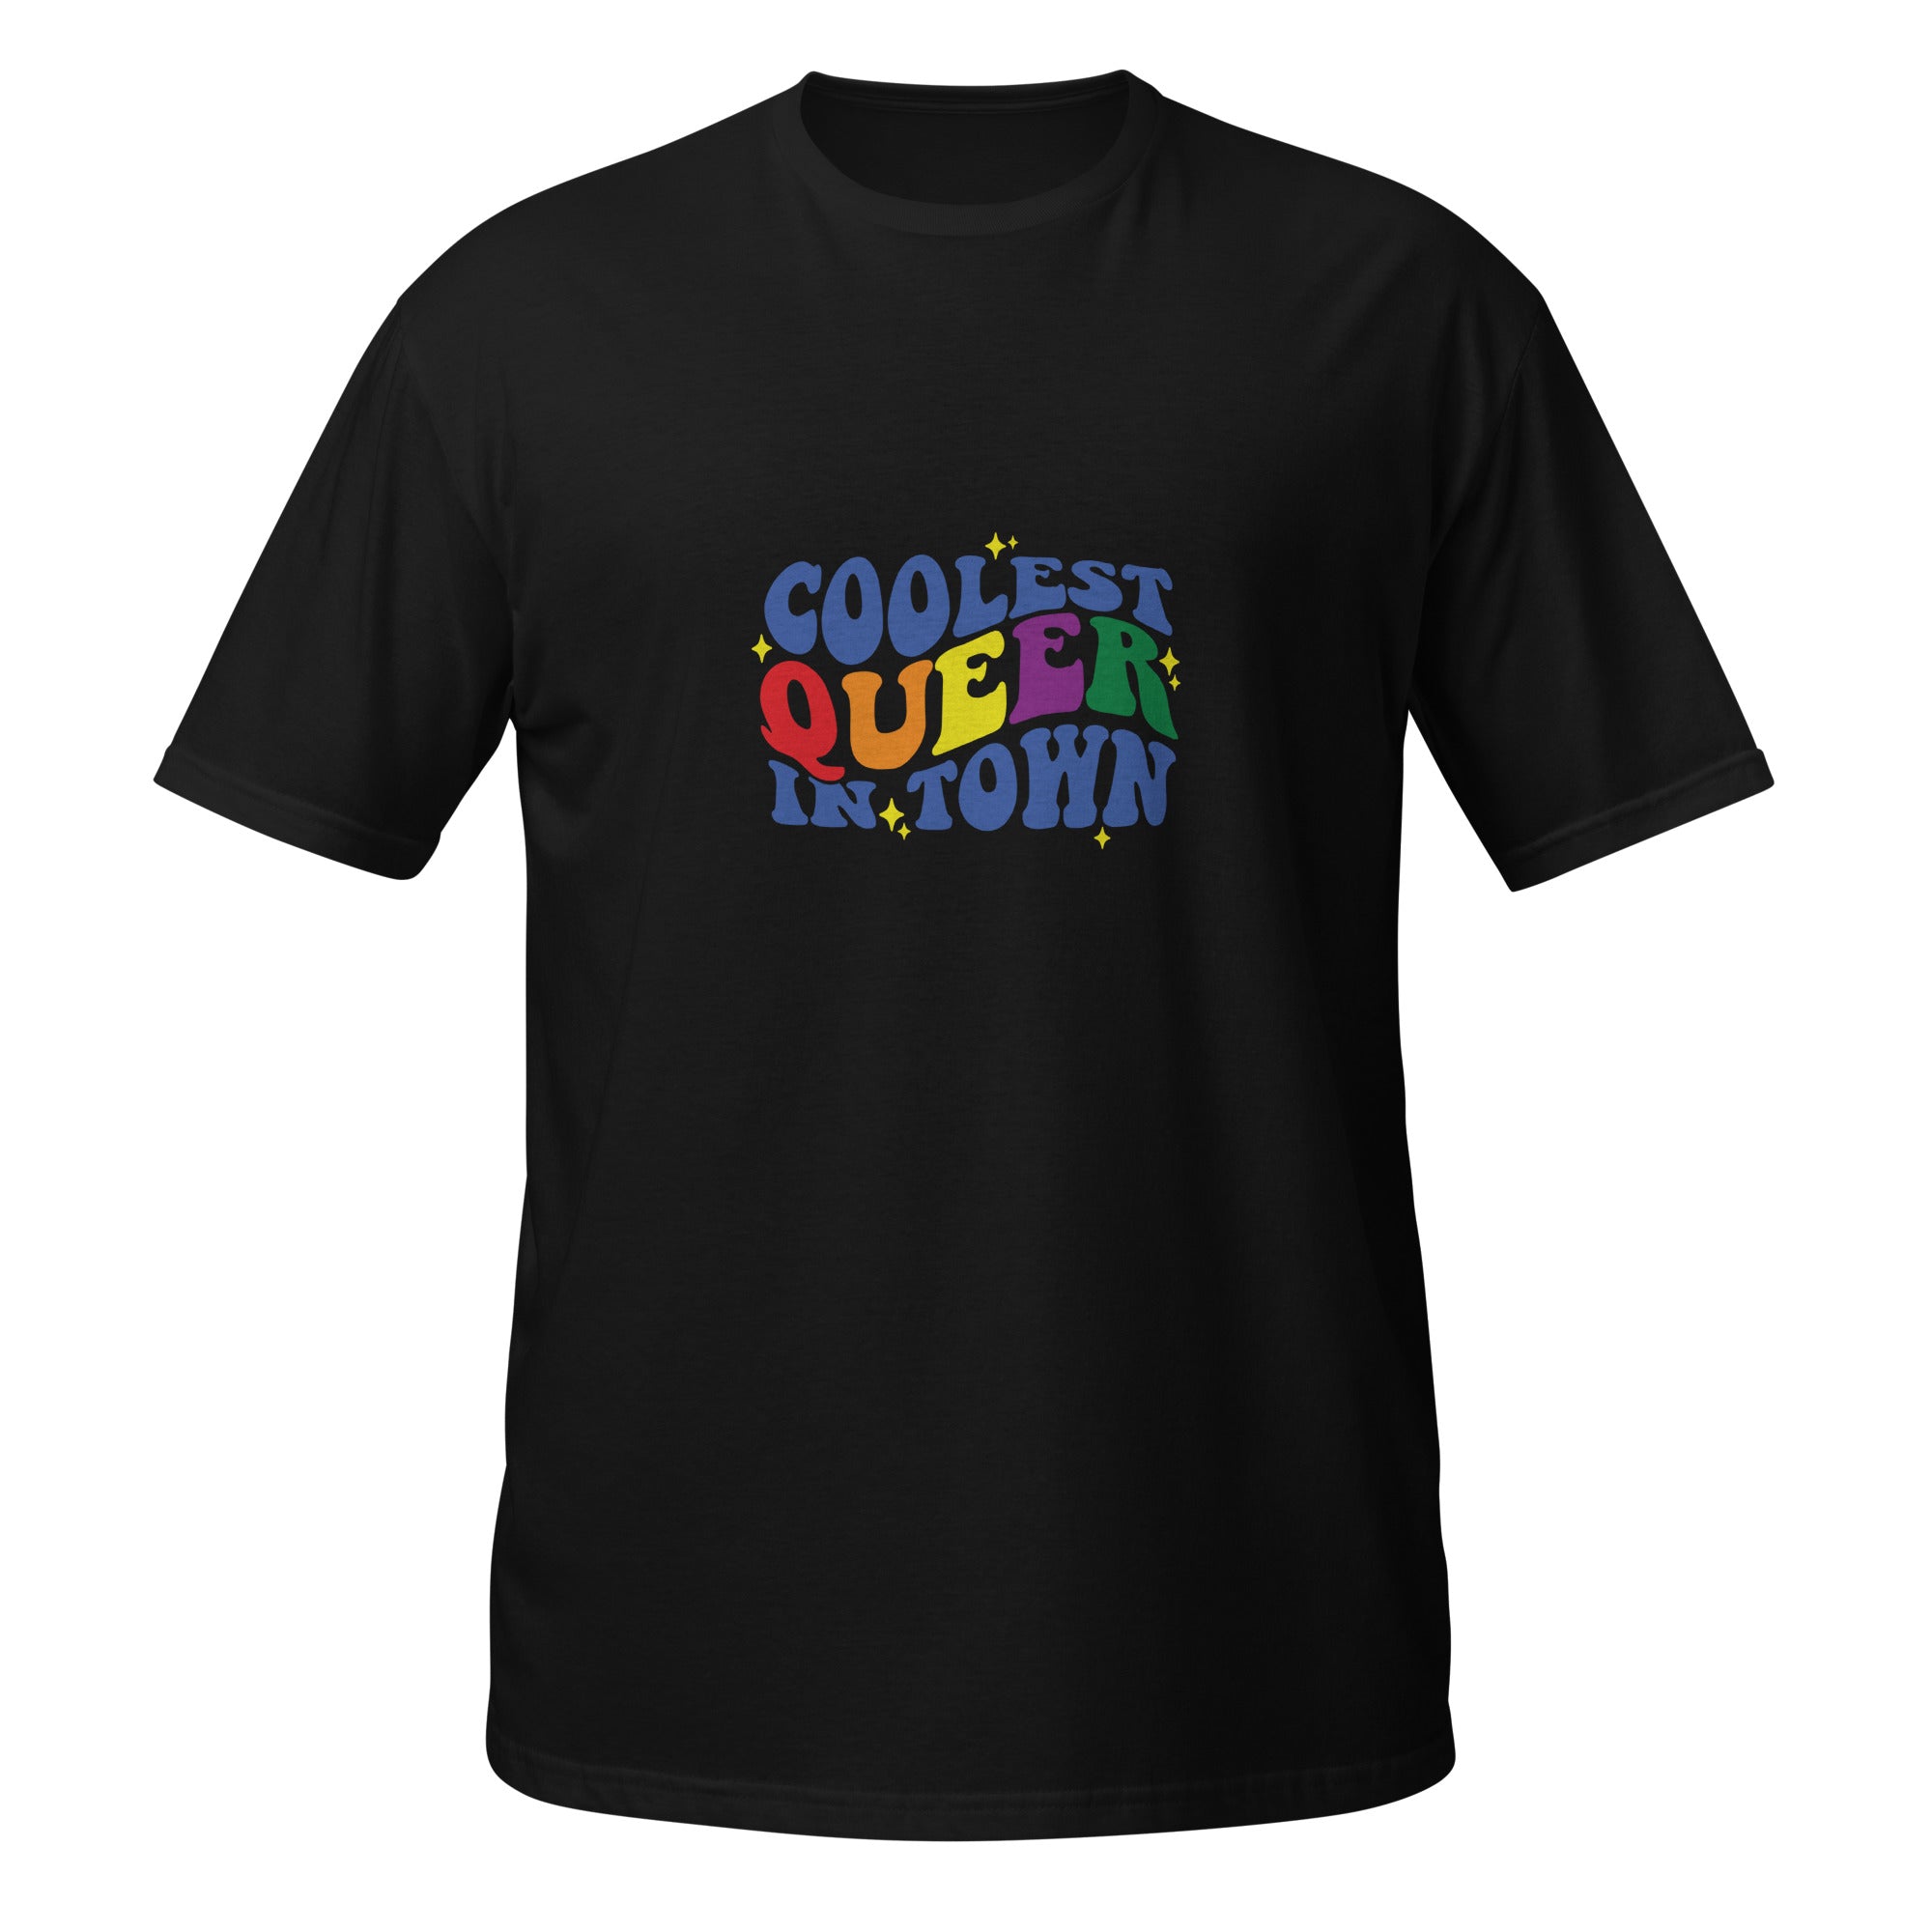 Short-Sleeve Unisex T-Shirt- Coolest queer in town